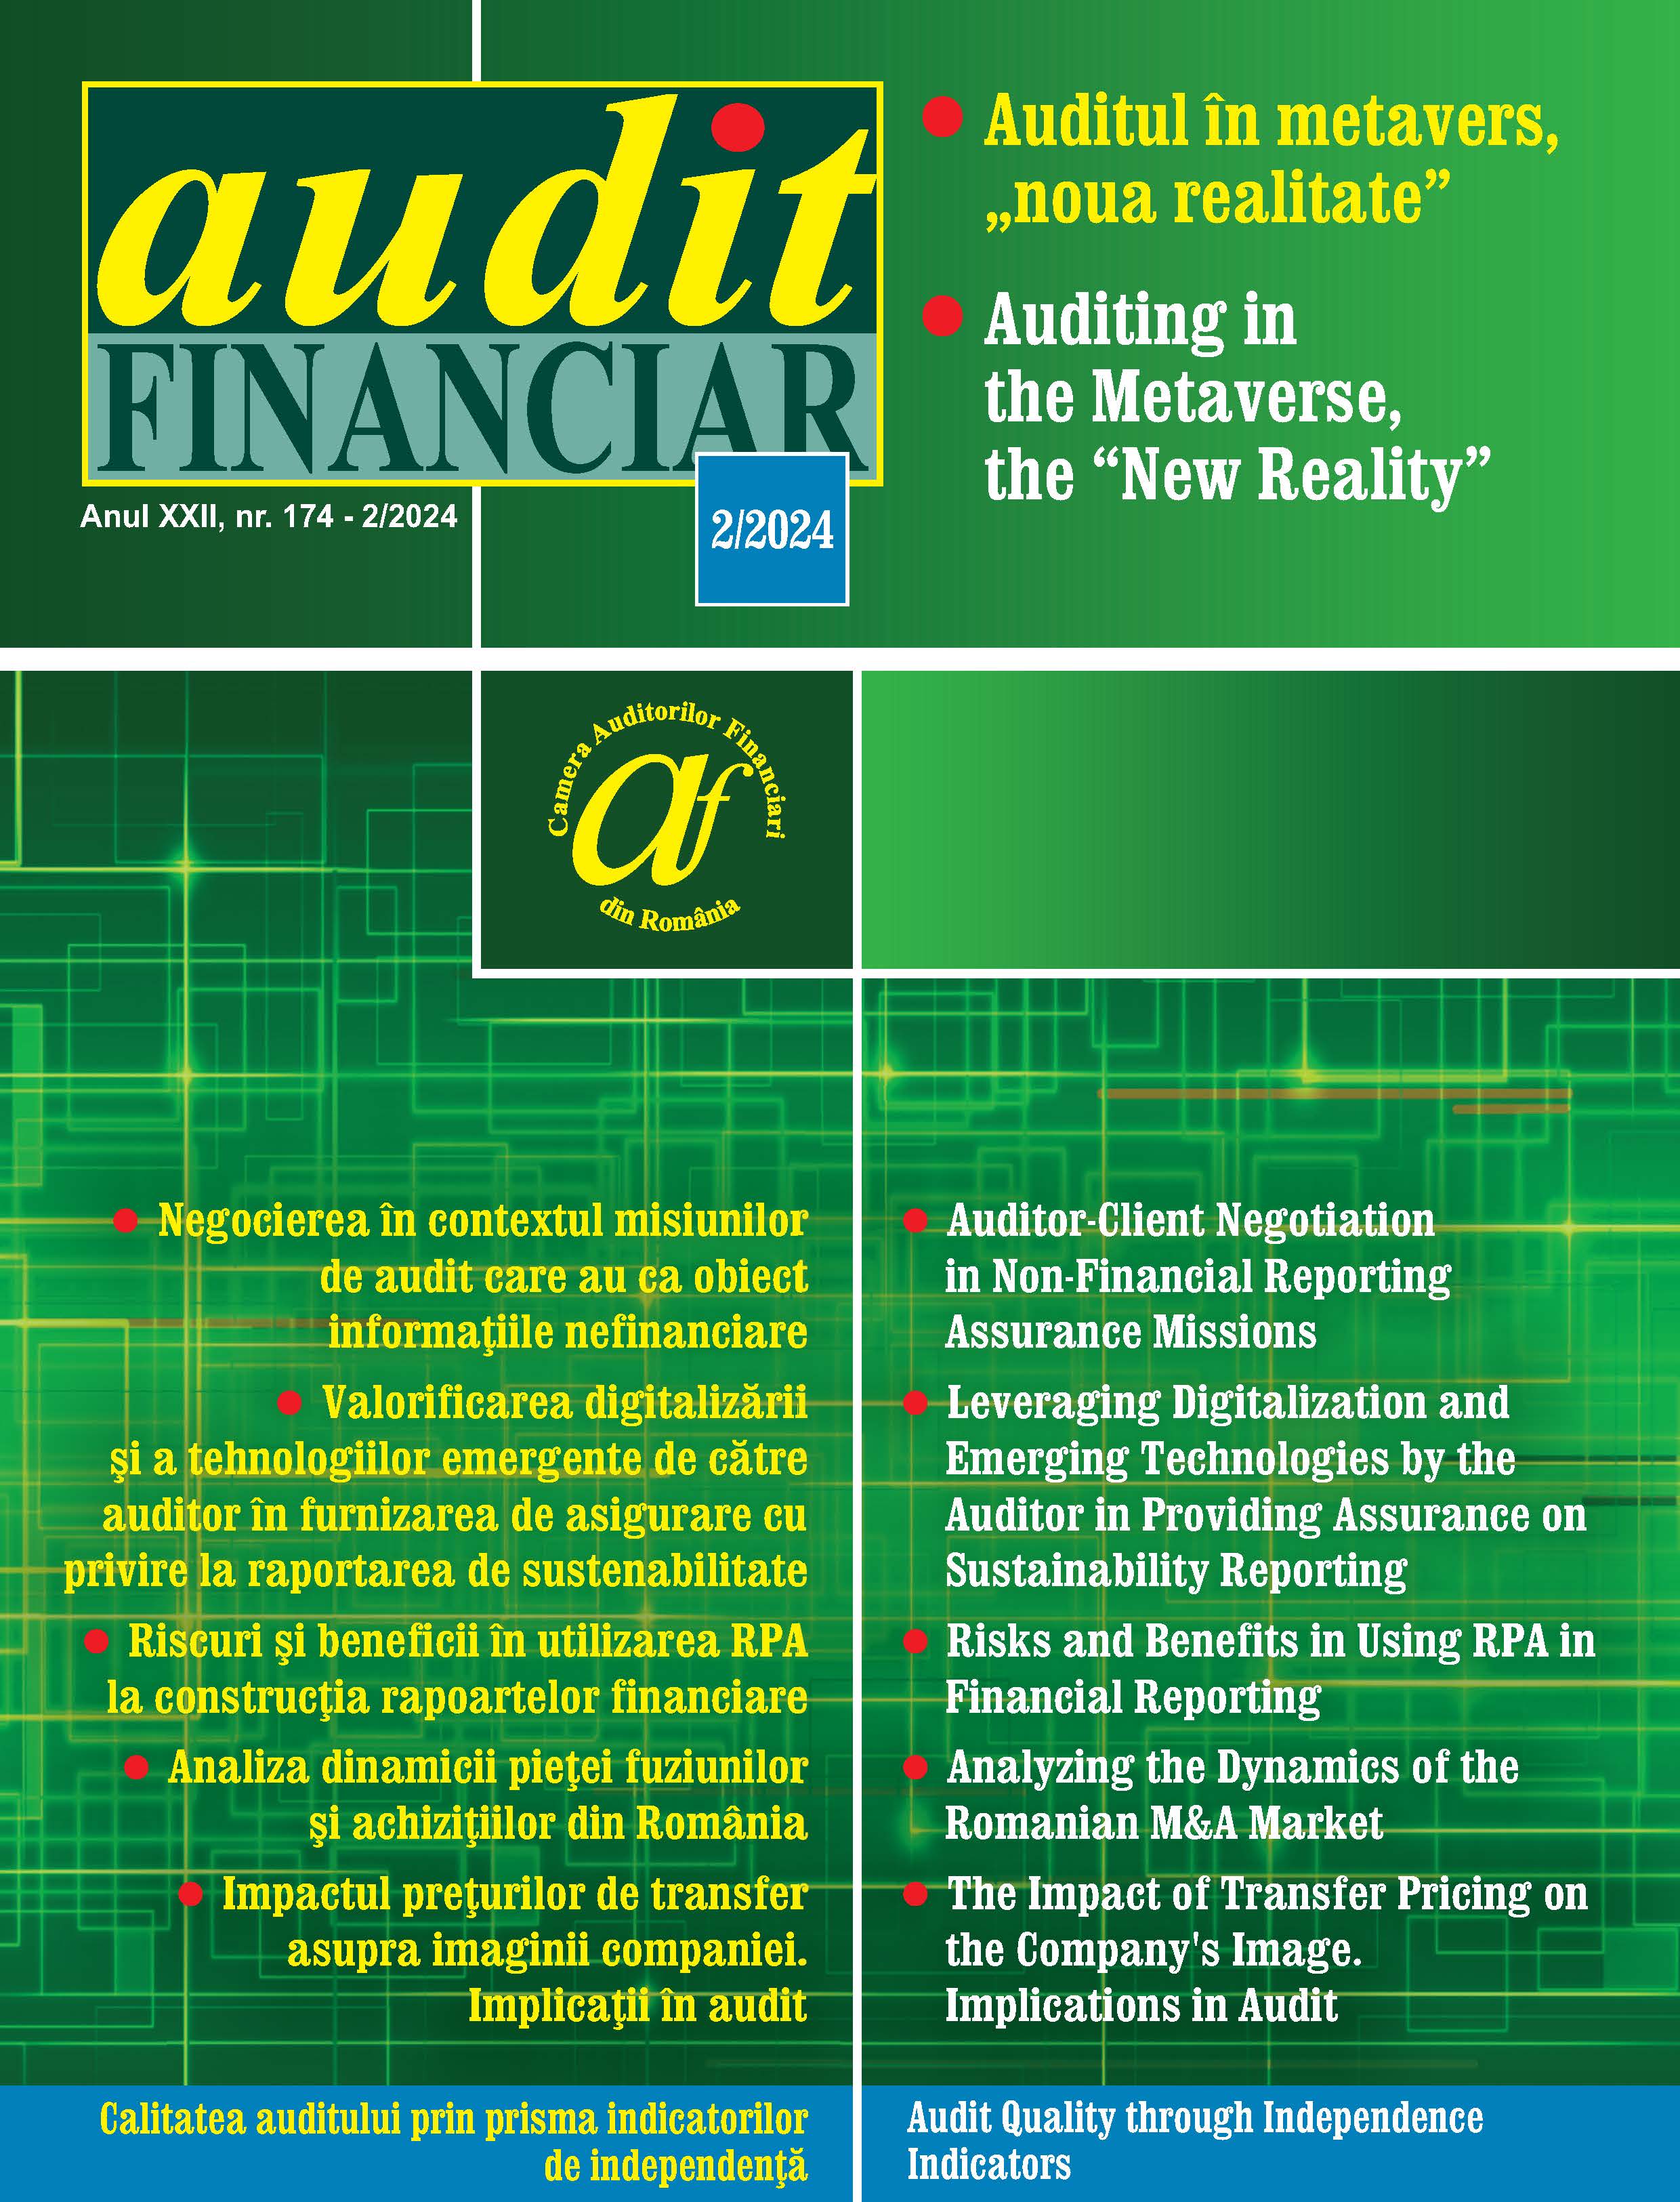 Auditor-Client Negotiation in Non-Financial Reporting Assurance Missions Cover Image